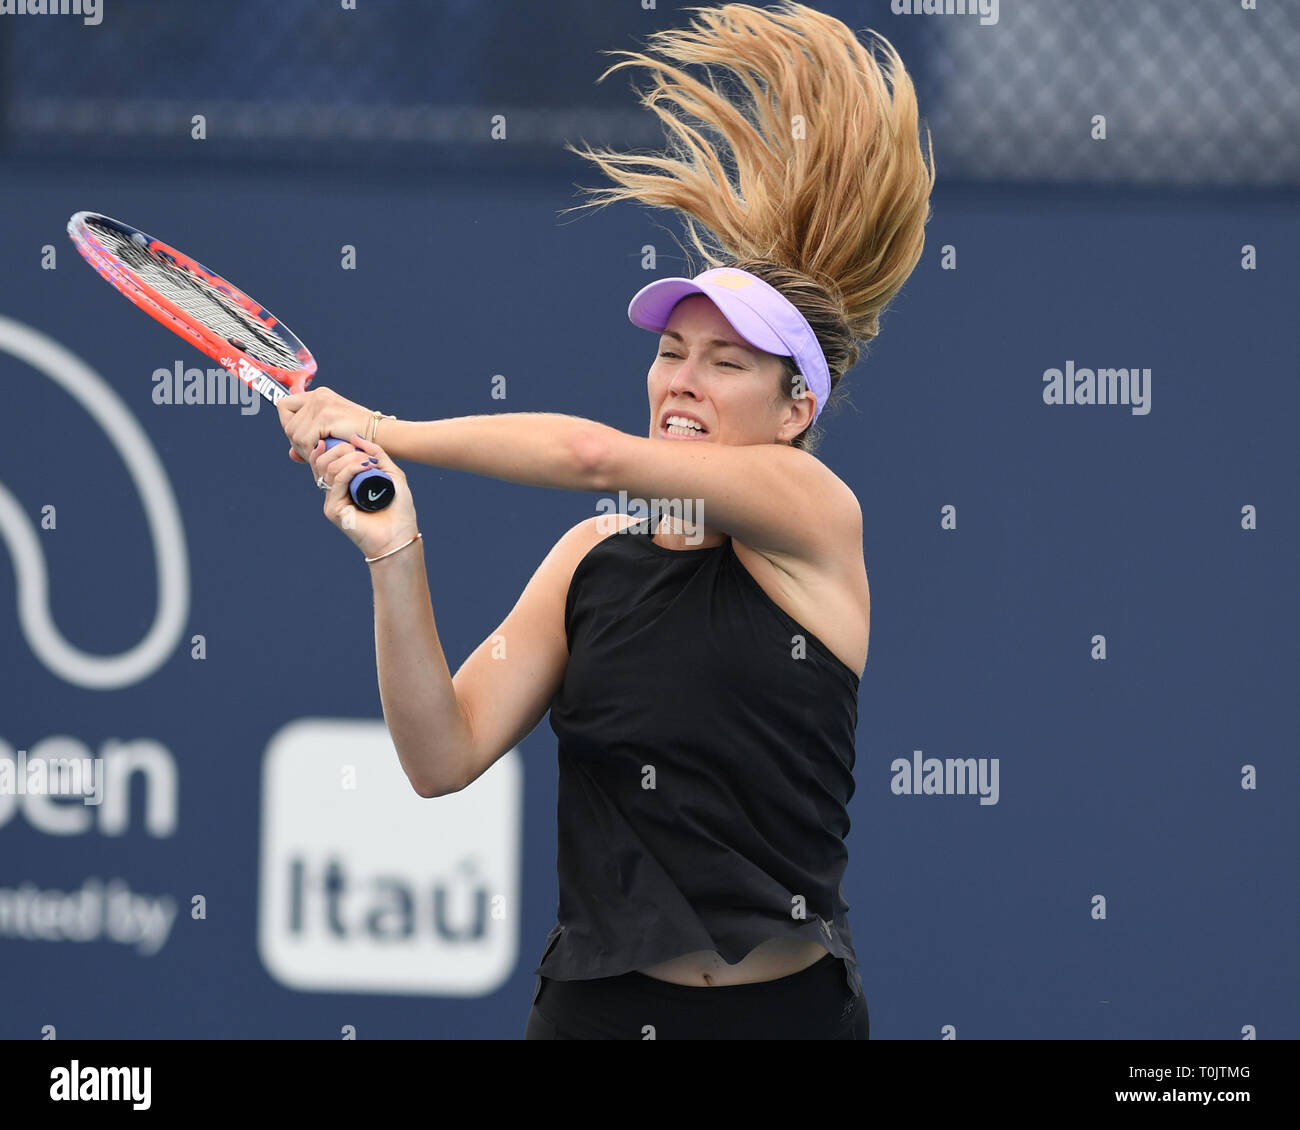 Miami Gardens FL, USA. 20th Mar, 2019. Danielle Collins is seen on the  practice court during the Miami Open held at Hard Rock Stadium on March 20,  2019 in Miami Gardens, Florida. :